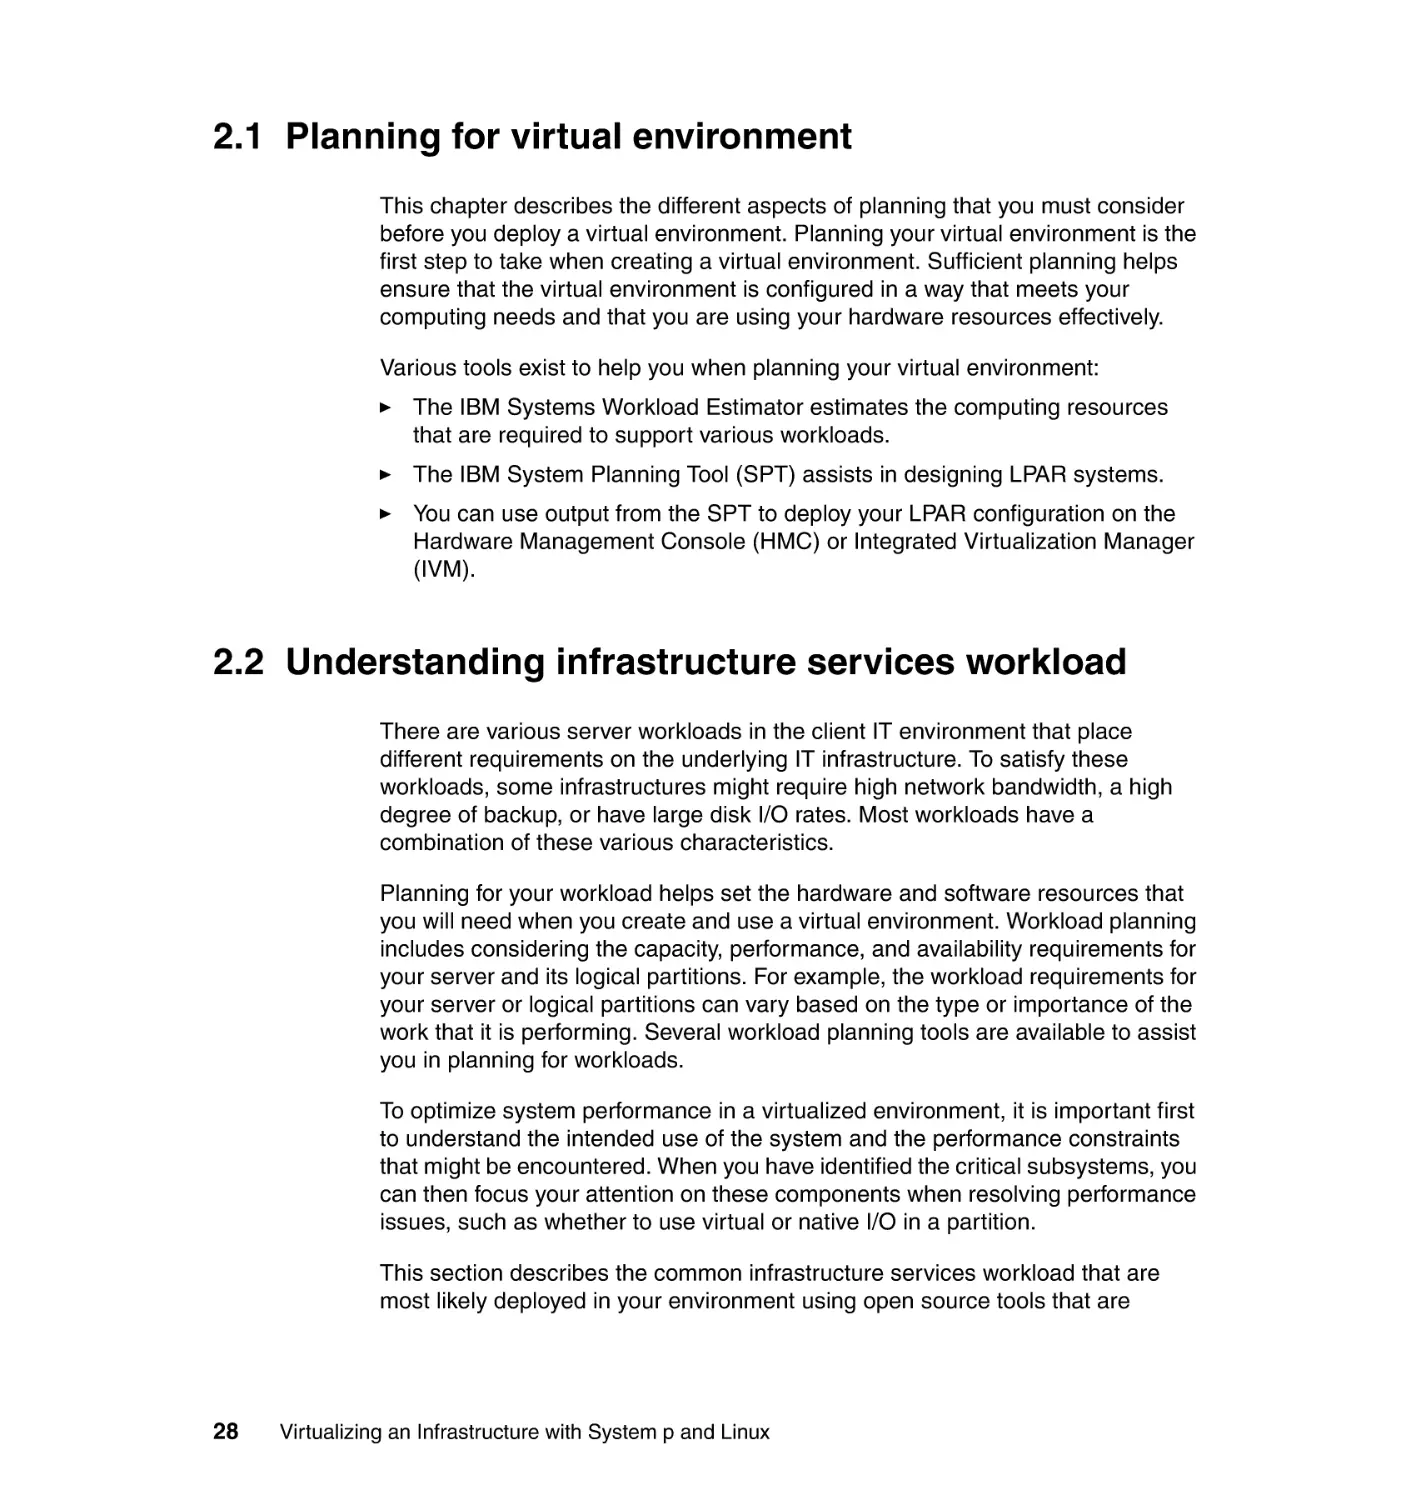 2.1 Planning for virtual environment
2.2 Understanding infrastructure services workload